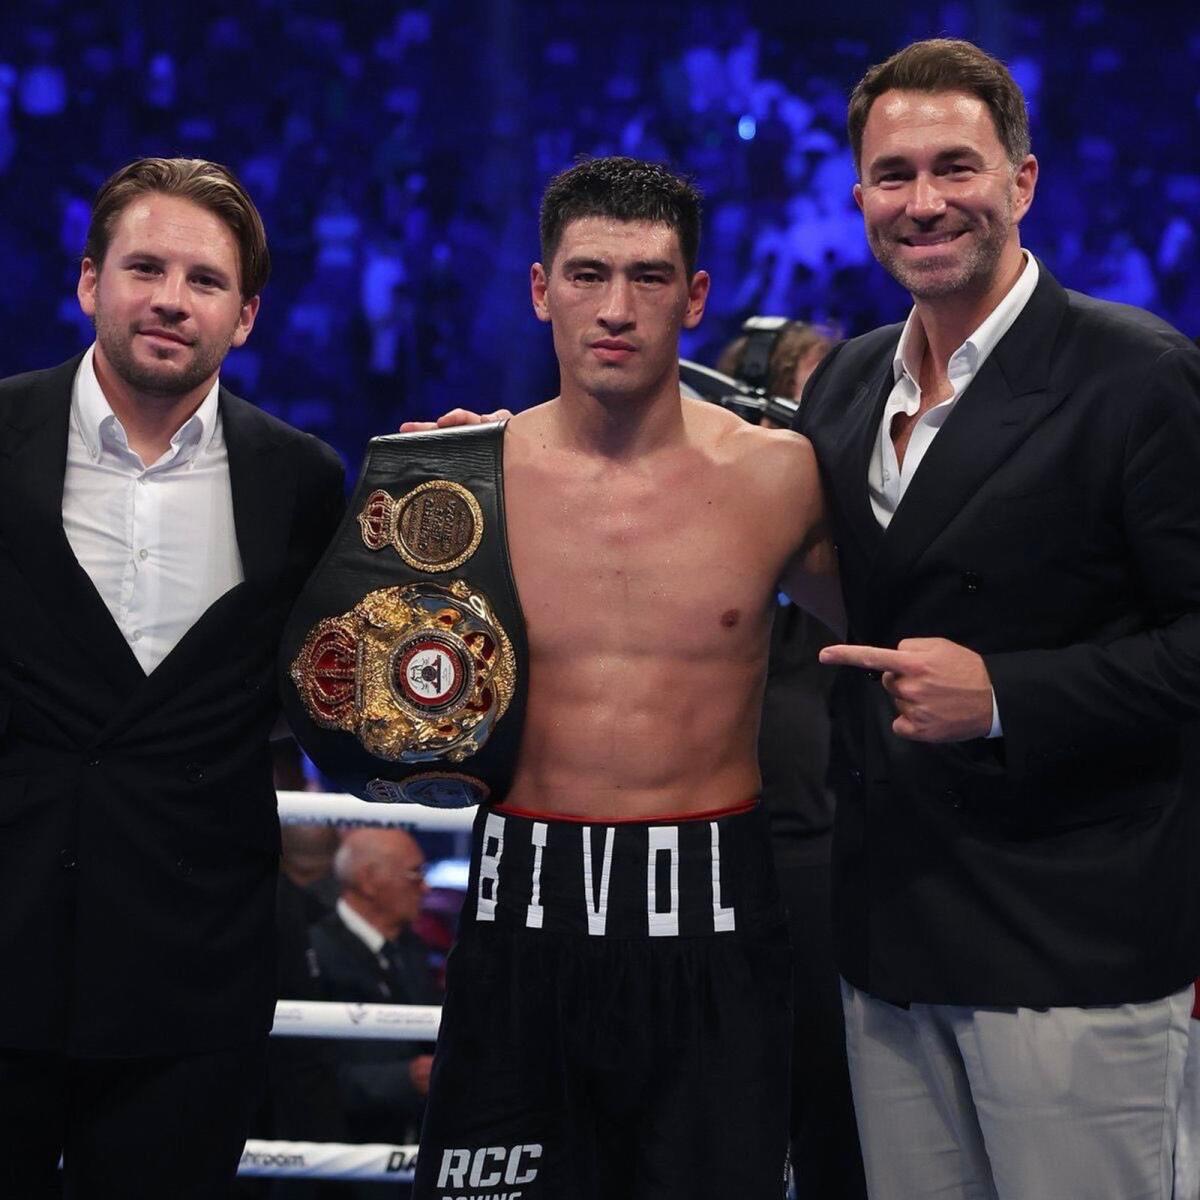 Dmitry Bivol (centre) after his victory in Abu Dhabi. — Supplied photo